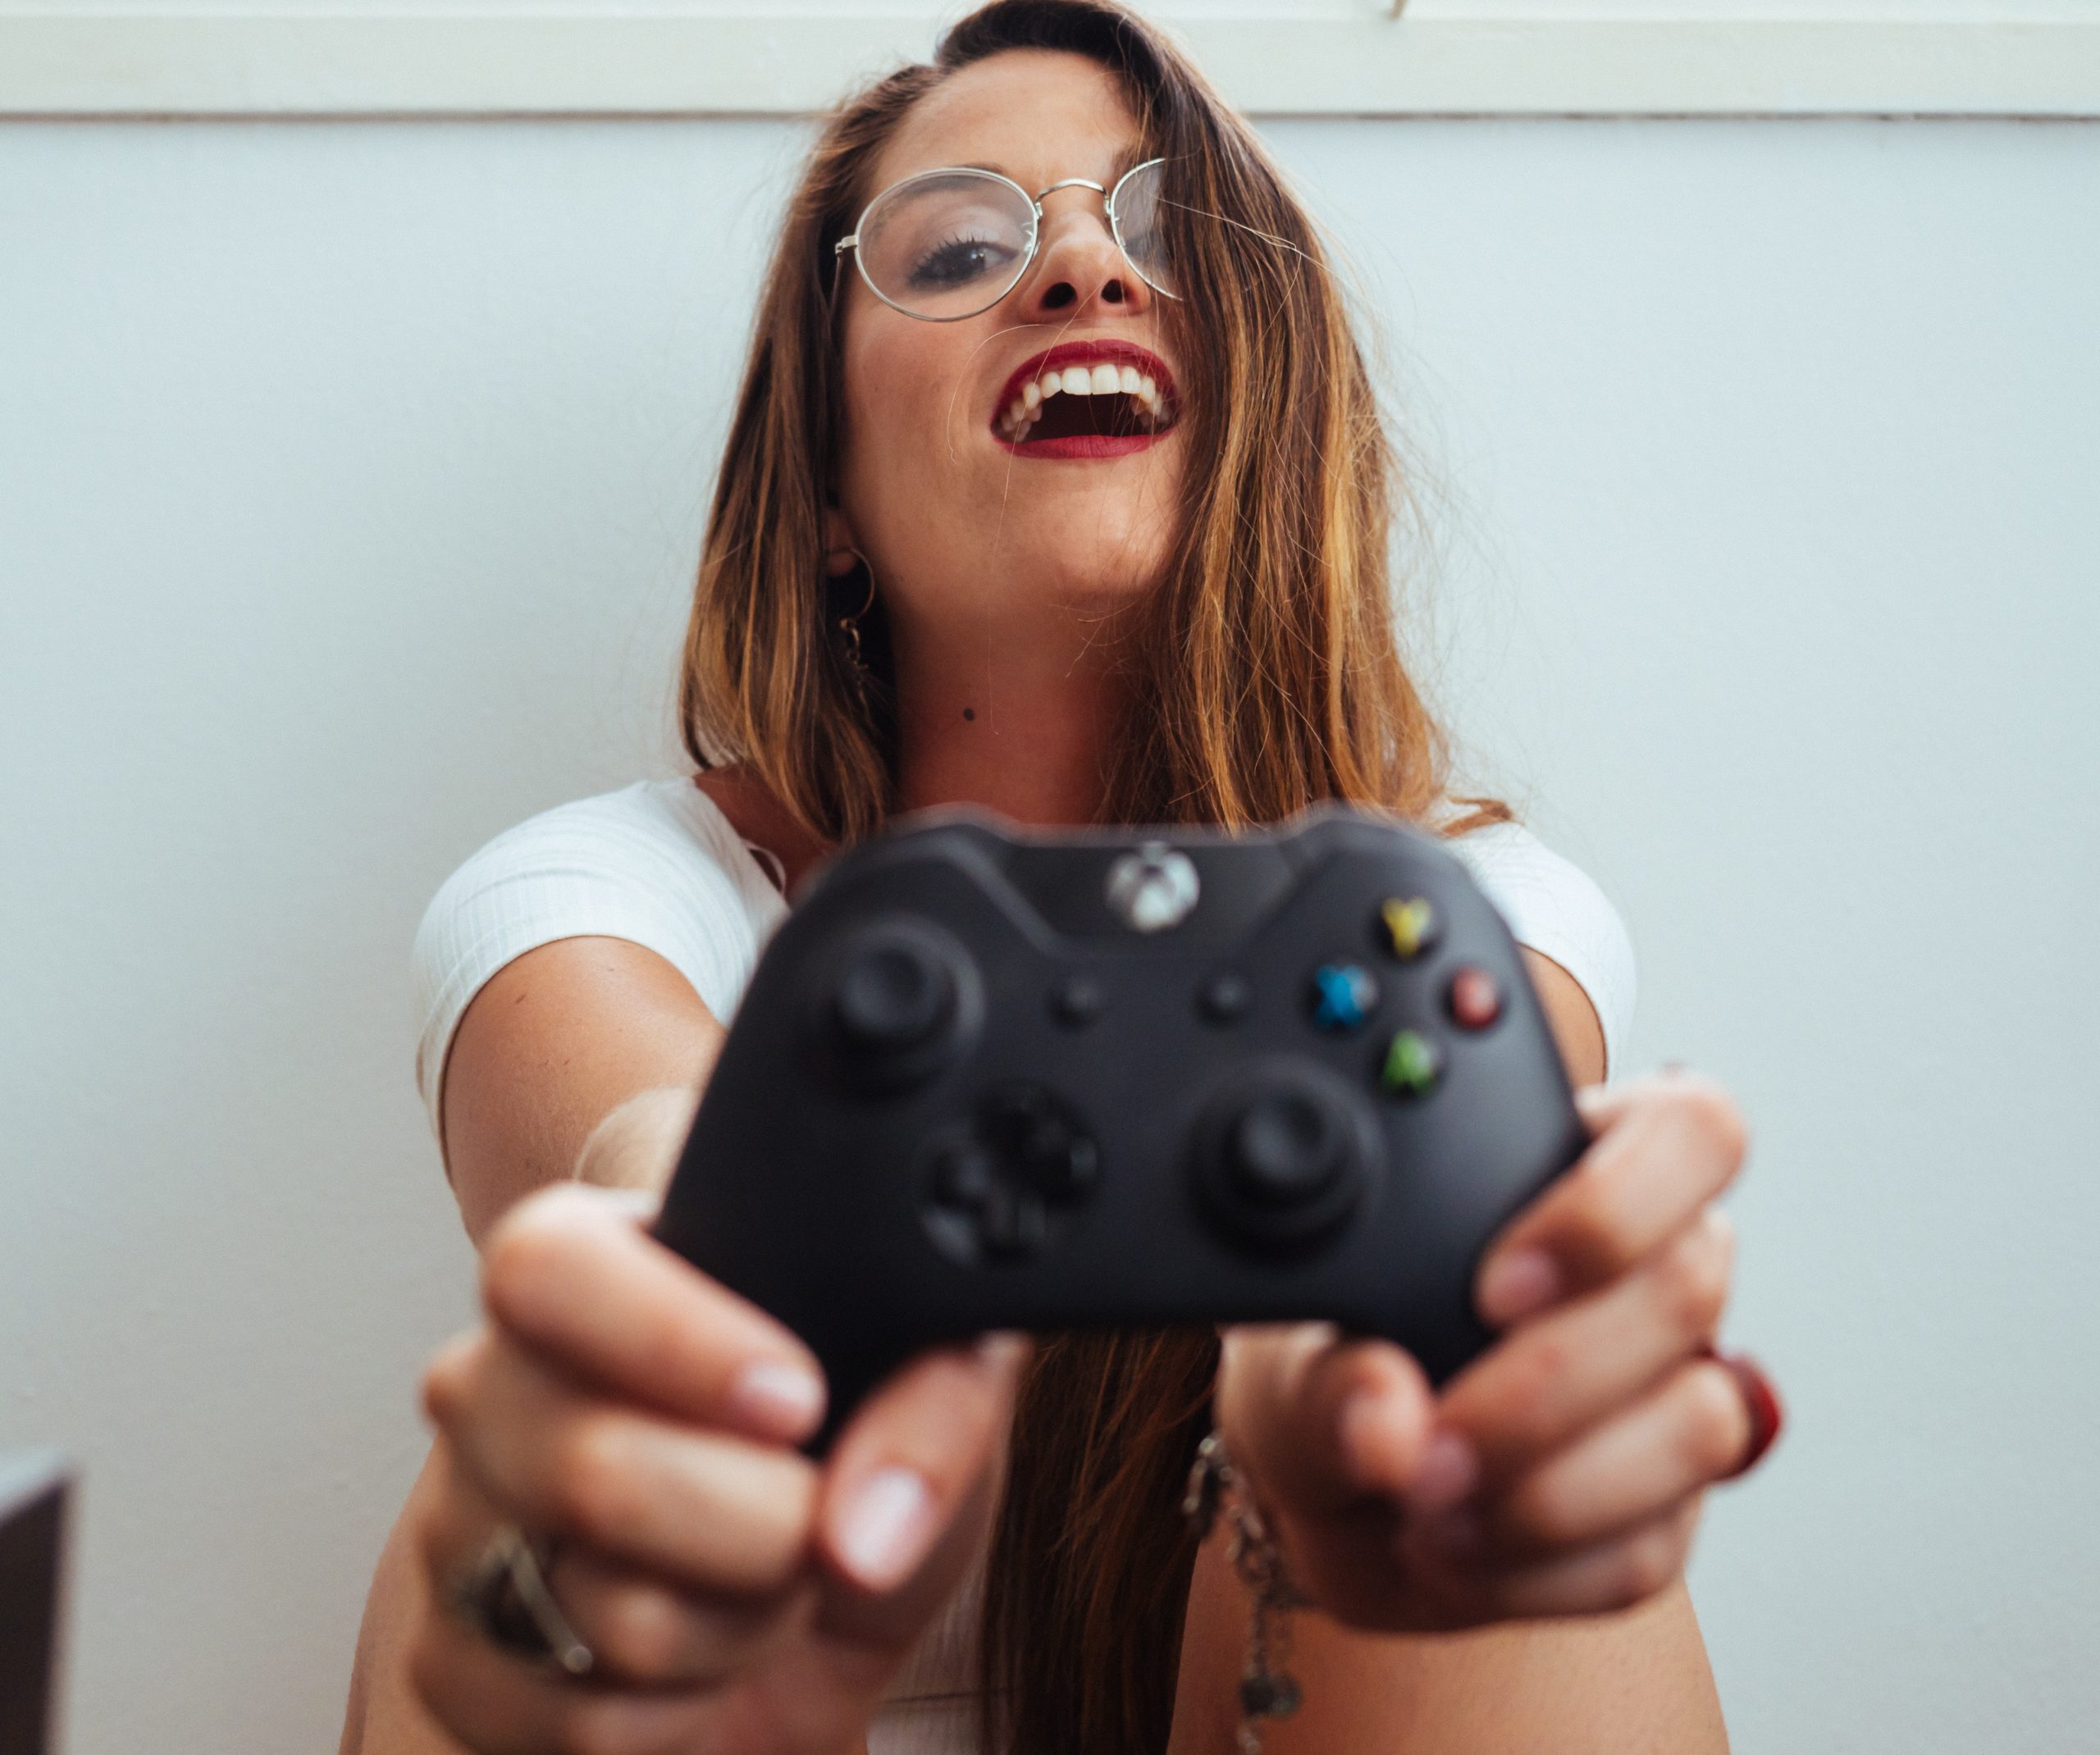 Geek insider, geekinsider, geekinsider. Com,, studies show video games can boost well-being, gaming, news